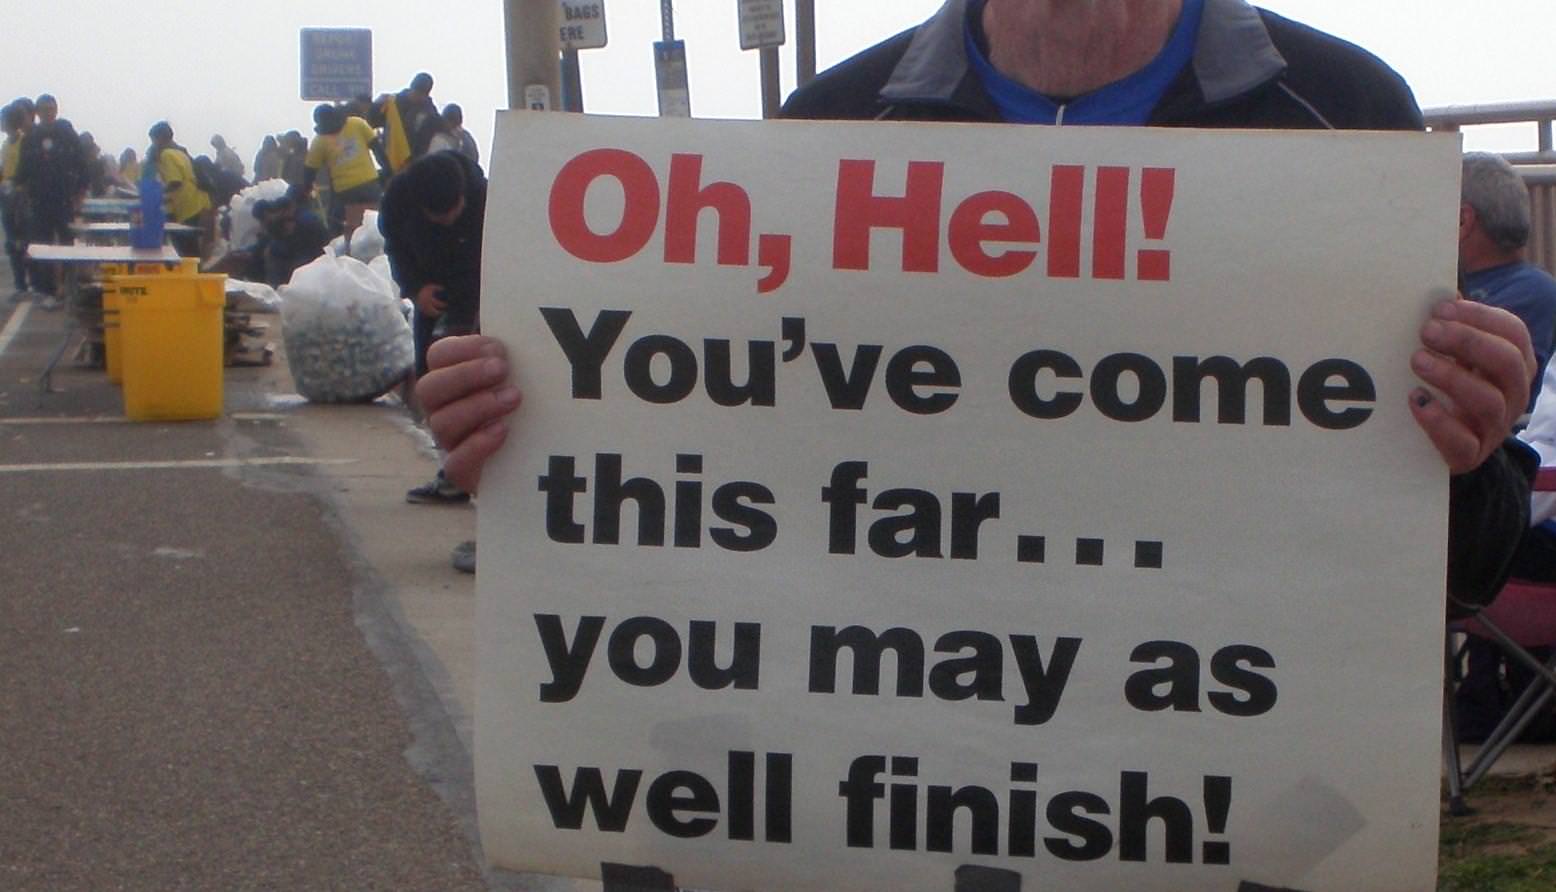 Runner Things #1519: Oh, hell! You've come this far. You may as well finish! - fb,running-humor,signage